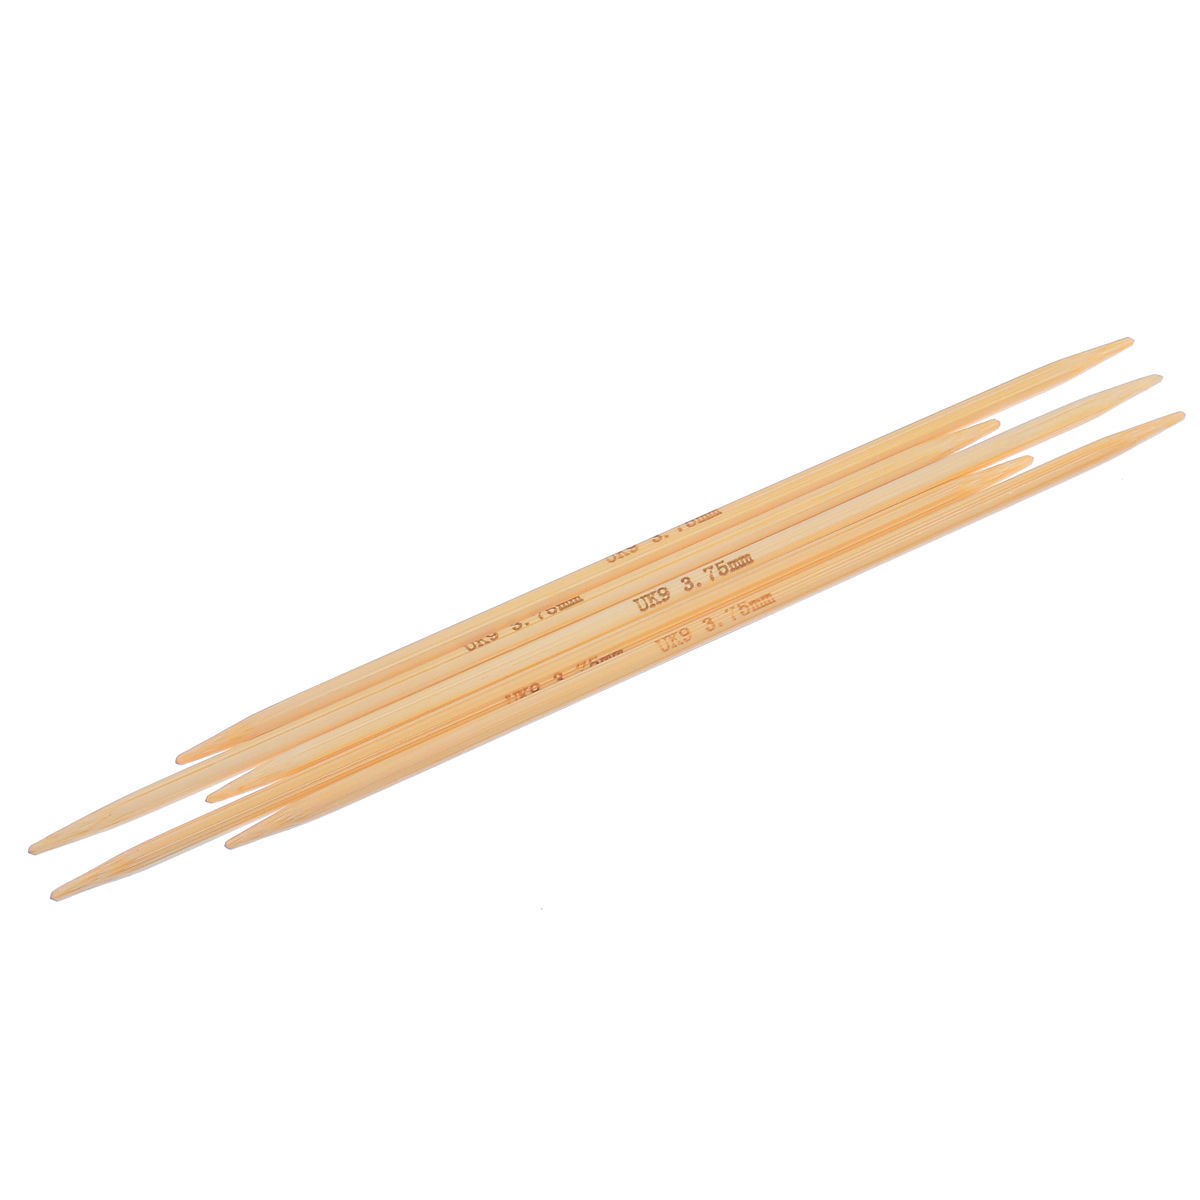 Picture of (UK9 3.75mm) Bamboo Double Pointed Knitting Needles Natural 15cm(5 7/8") long, 1 Set ( 5 PCs/Set)